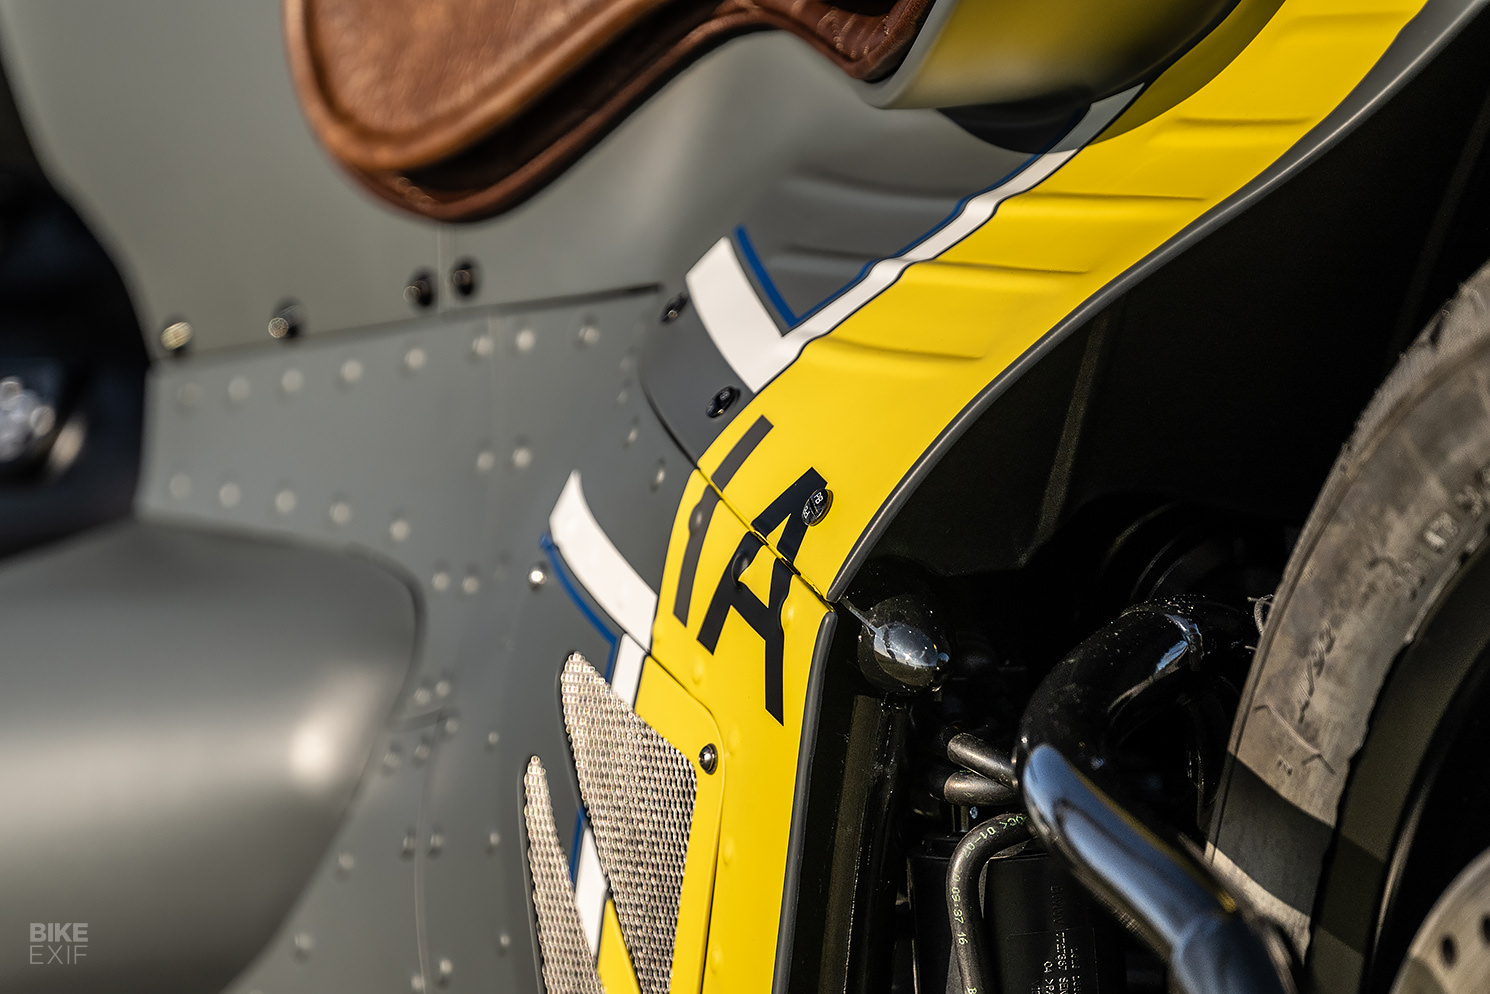 This customised BMW Motorrad R 18 is inspired from an aircraft